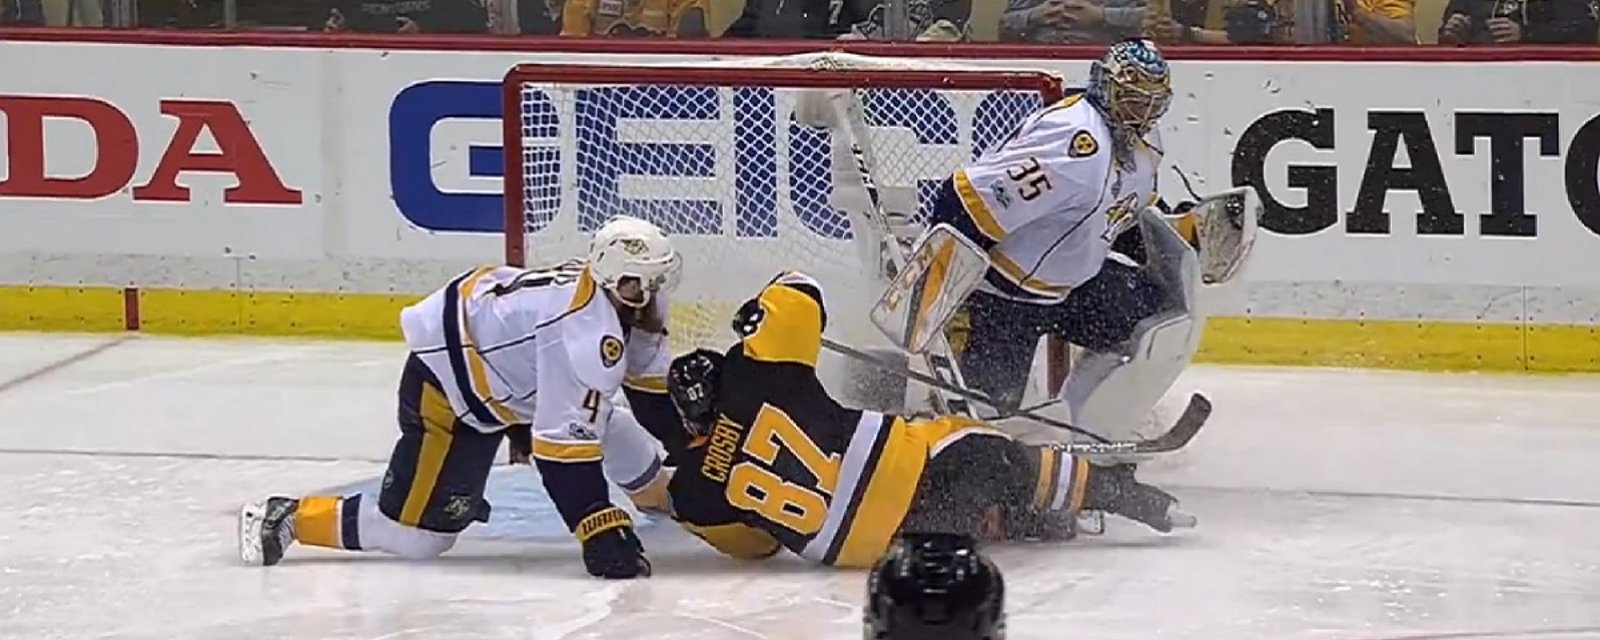 Crosby ends up in the back of the Predators net after minor contact from Ellis.